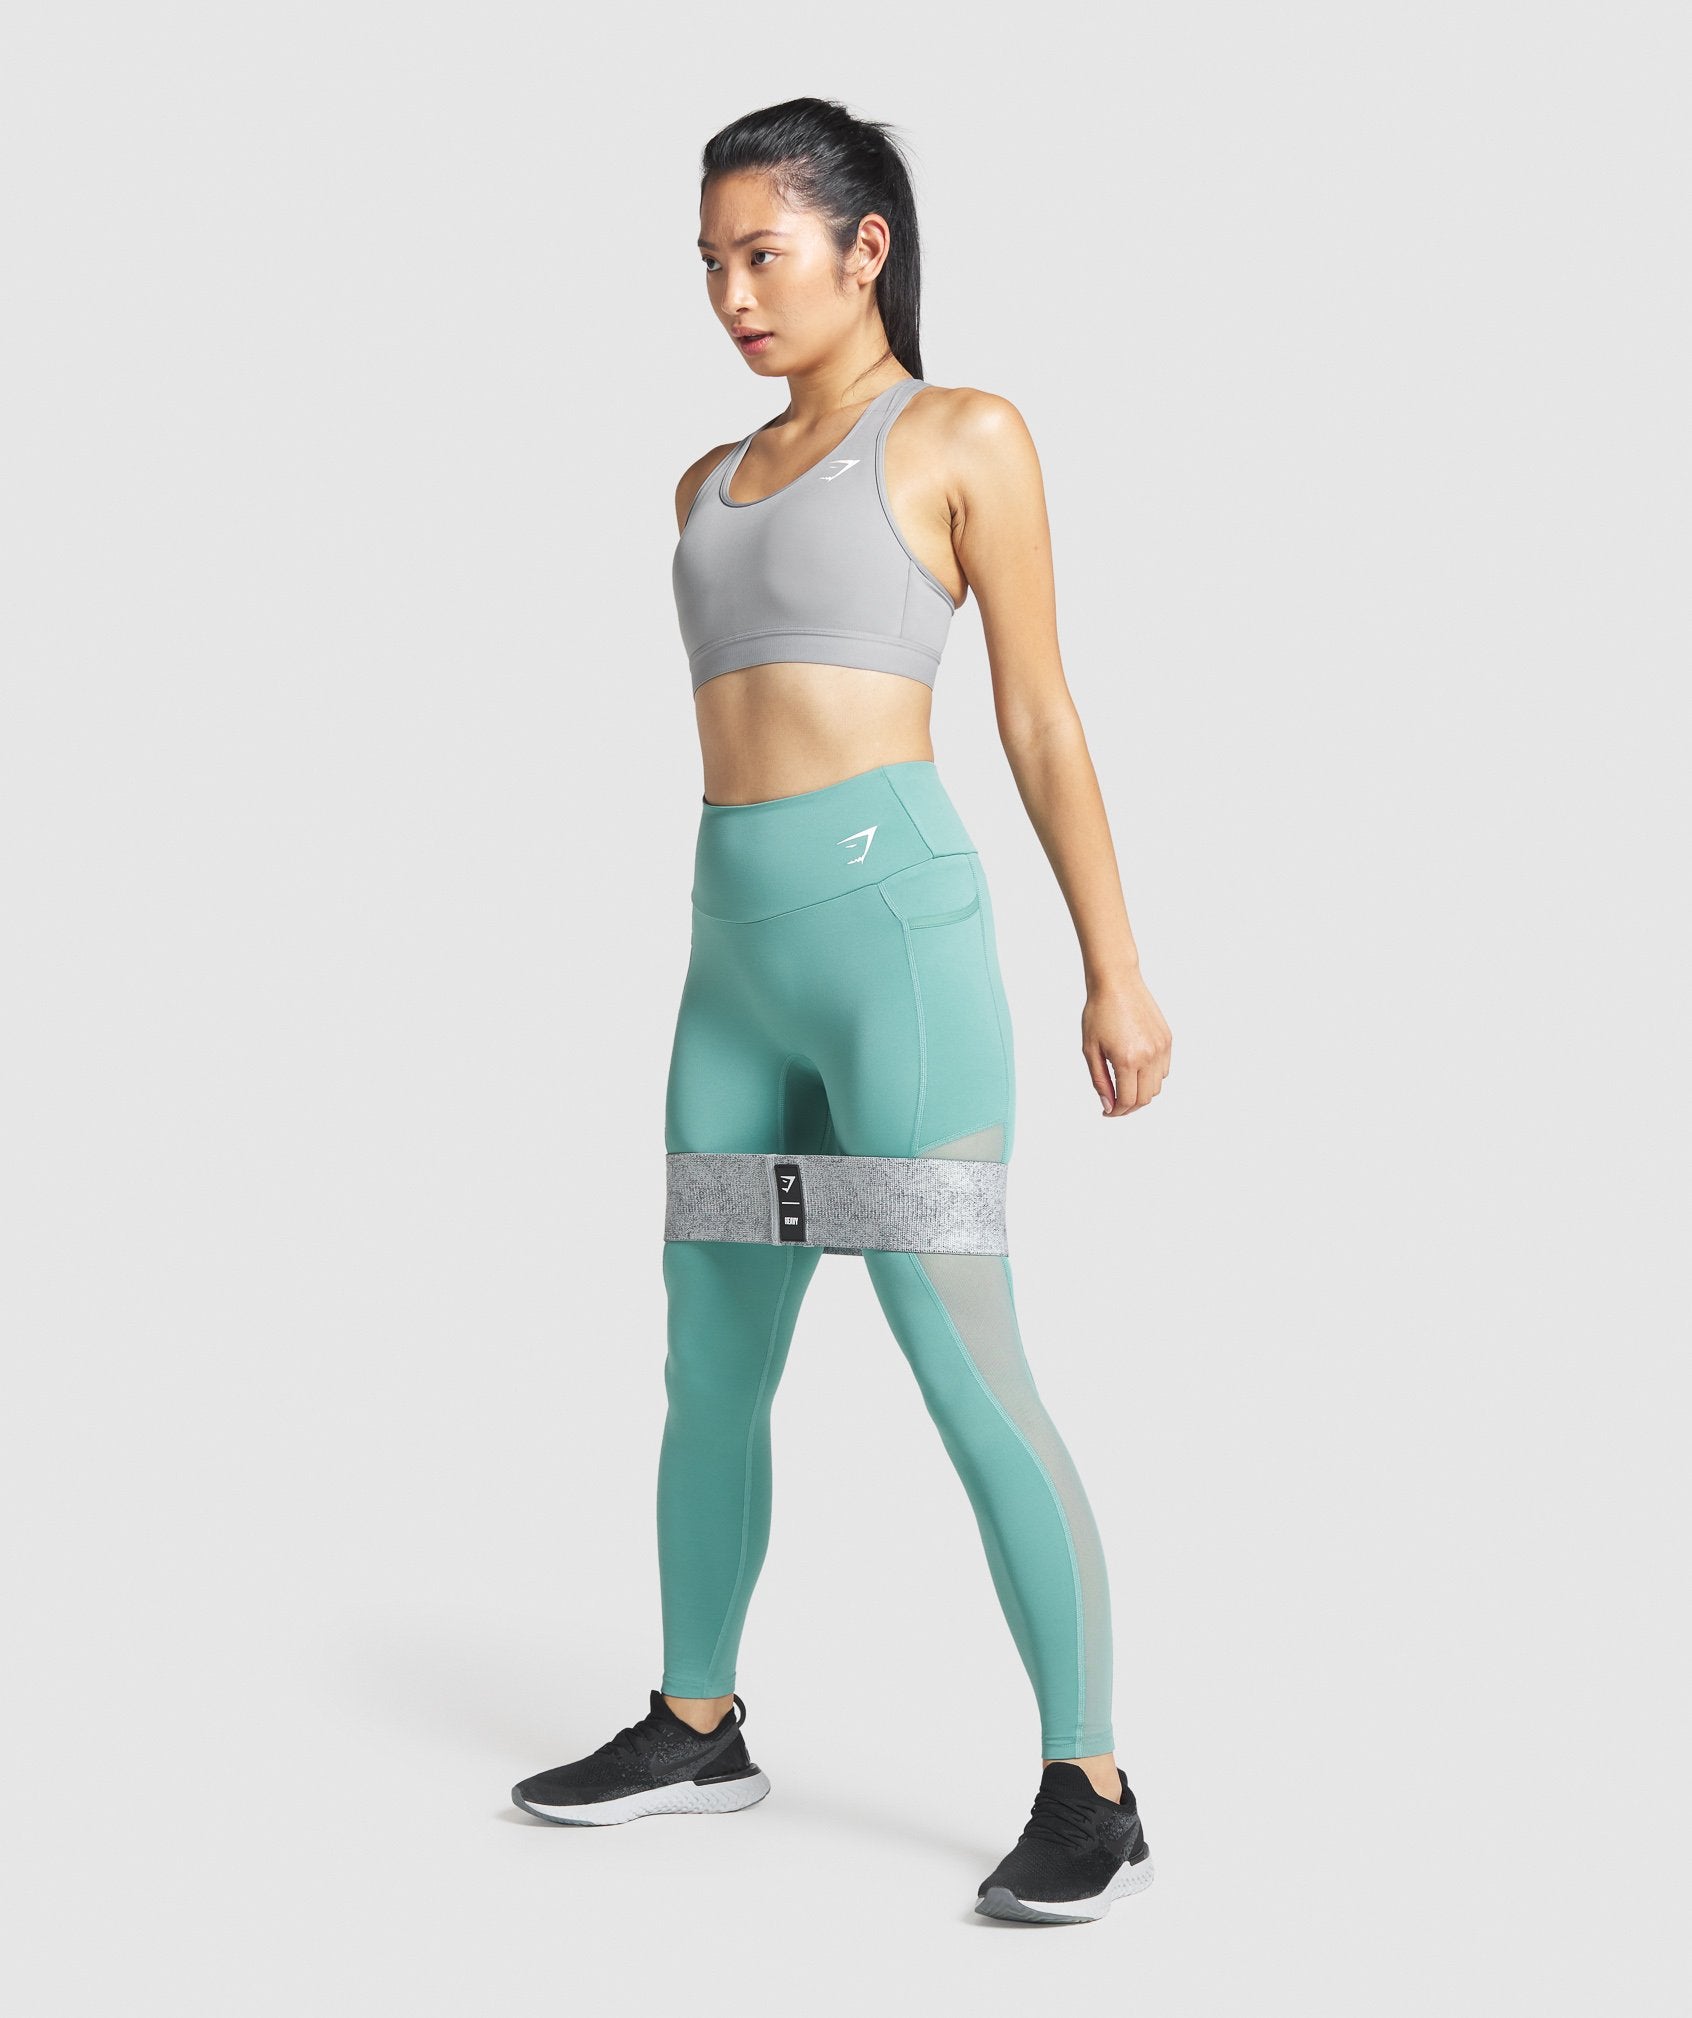 Heavy Resistance Band in Charcoal/Print